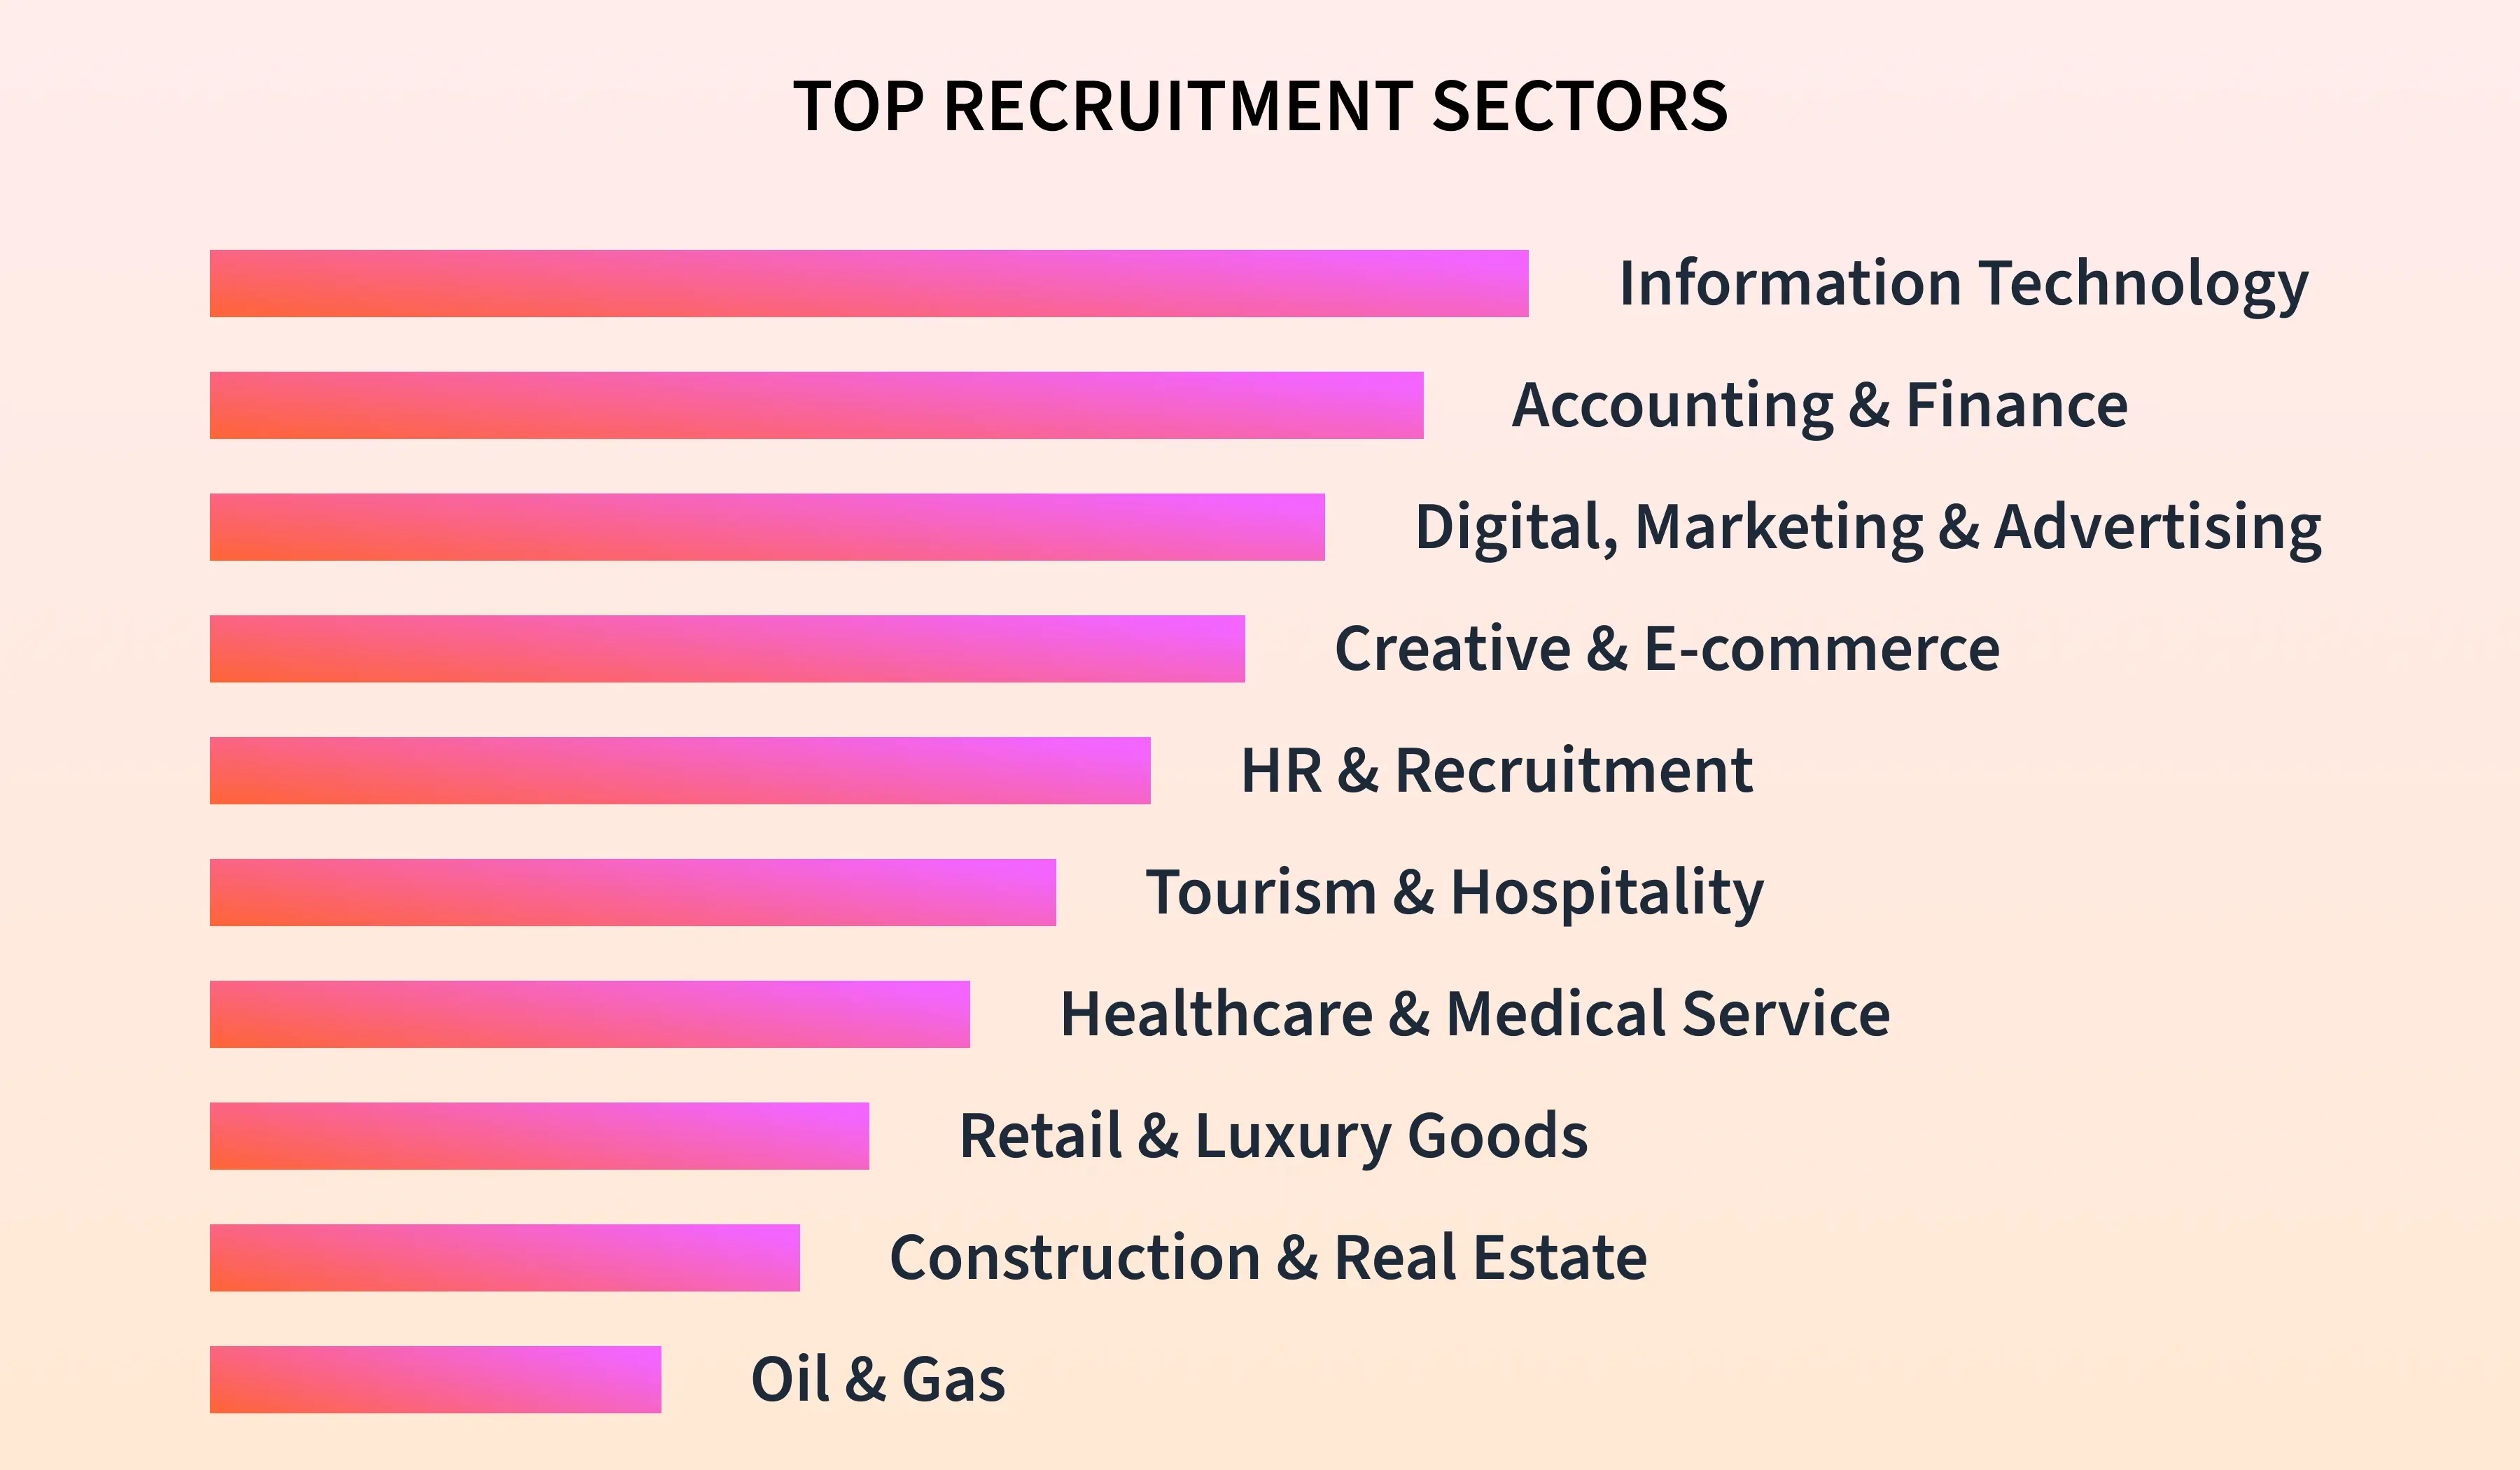  Top Recruitment Industries and Trends in Dubai